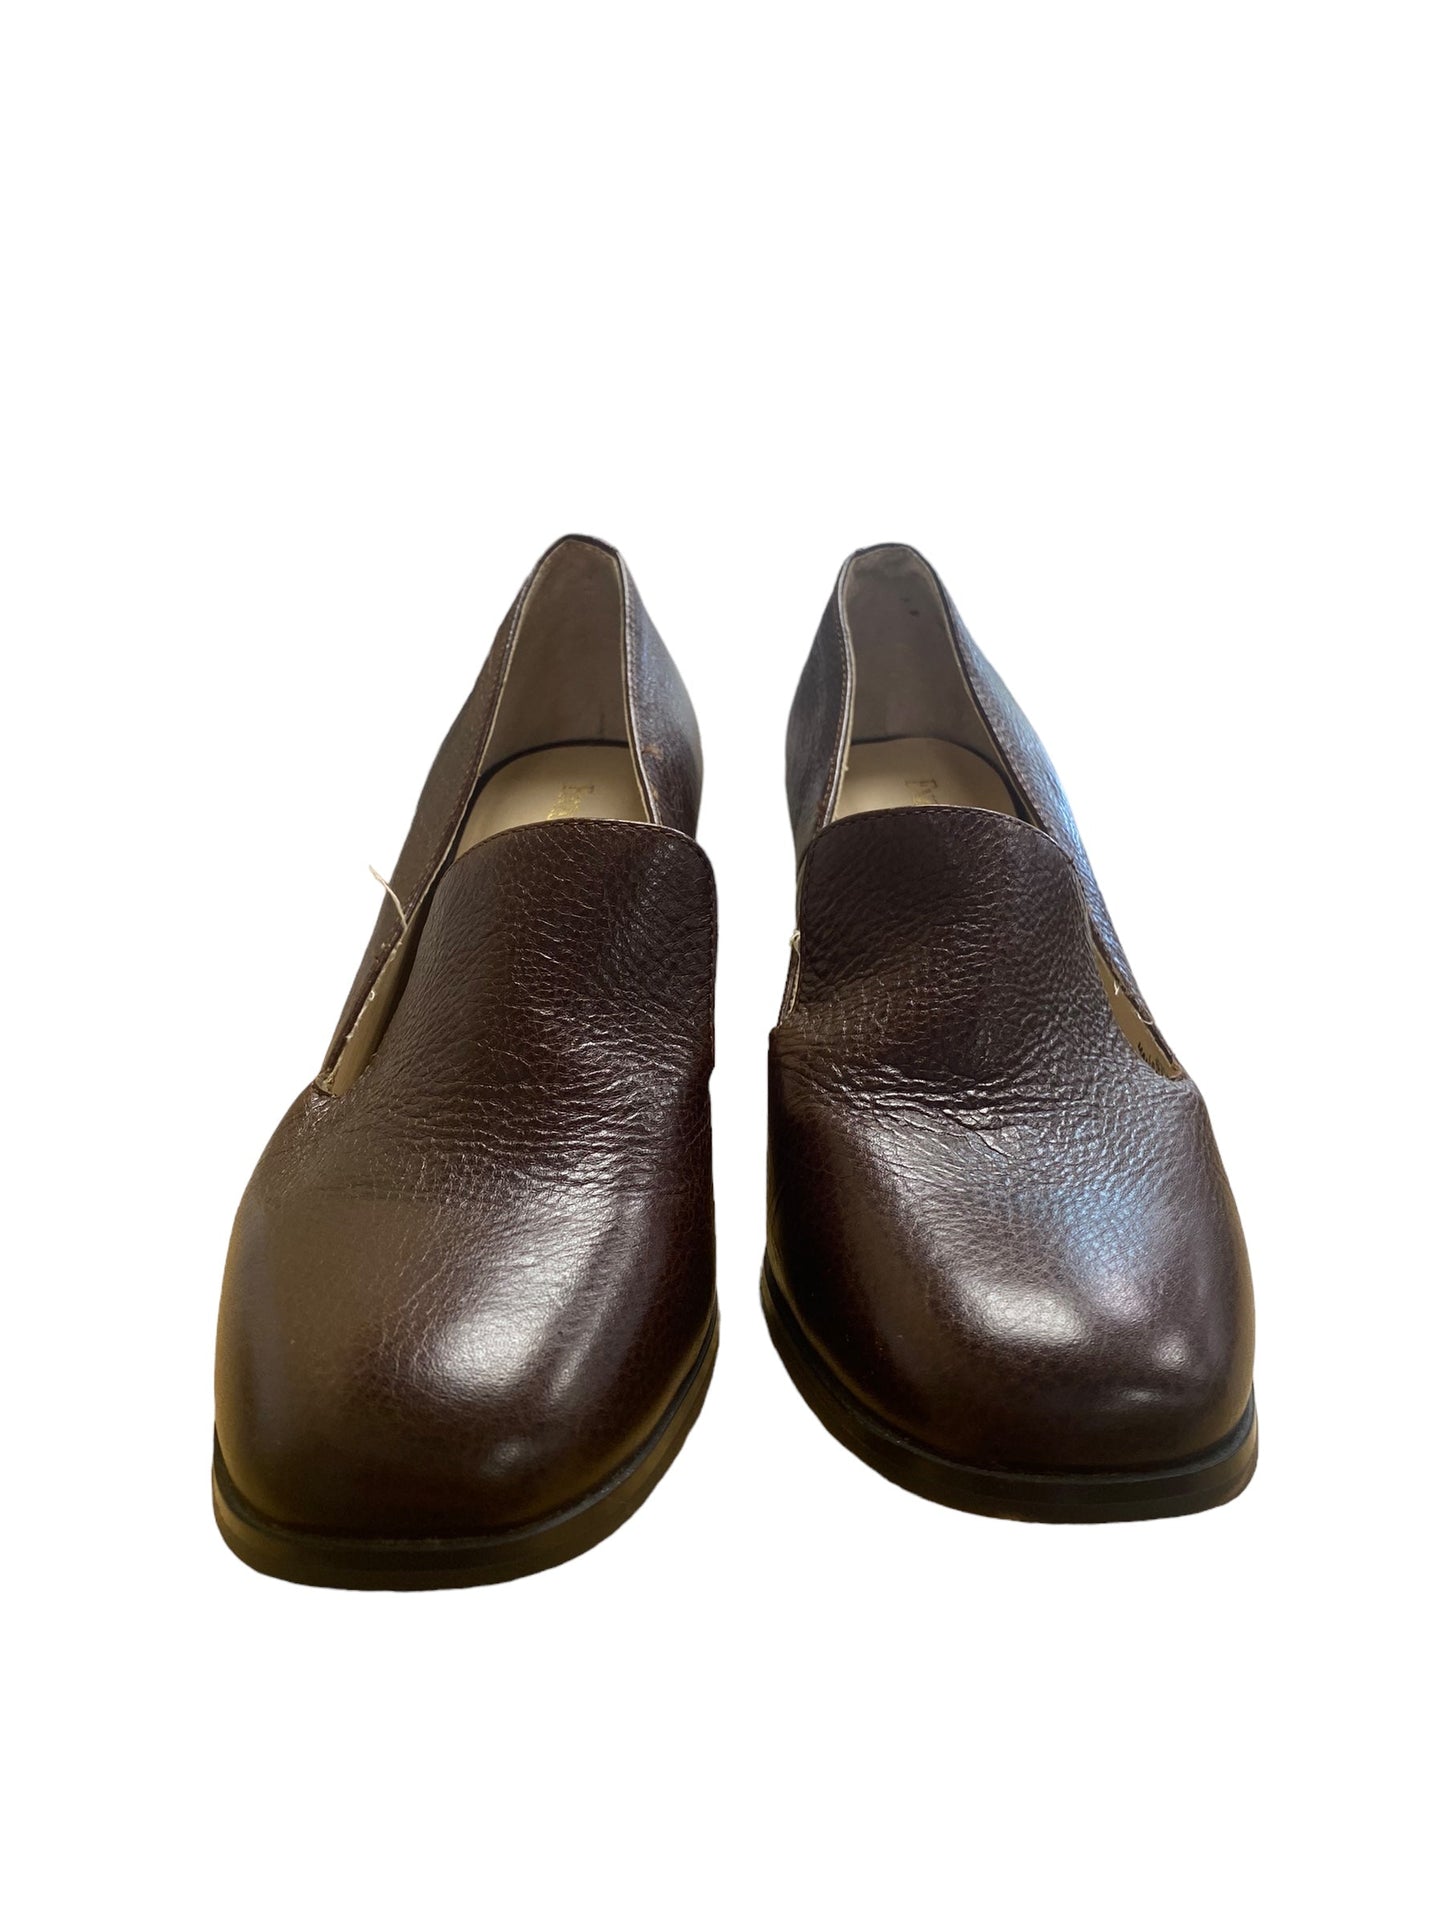 Brown Shoes Heels Block Enzo Angiolini, Size 6.5